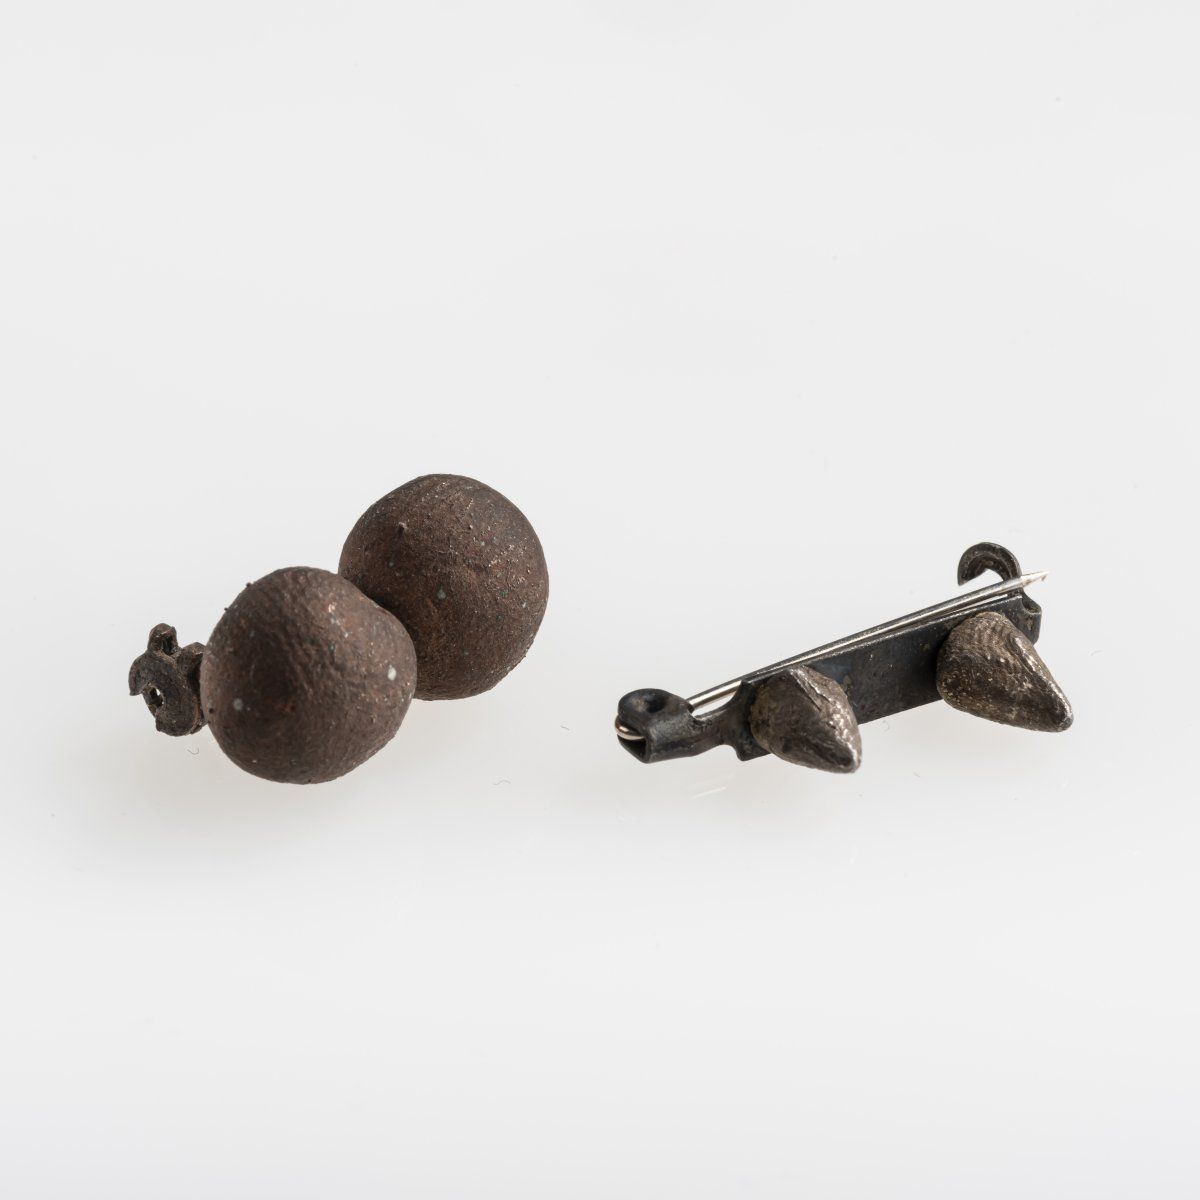 Null Karl Fritsch (1963 Sonthofen - lives in Wellington), 2 brooches, 1994/95, S&hellip;